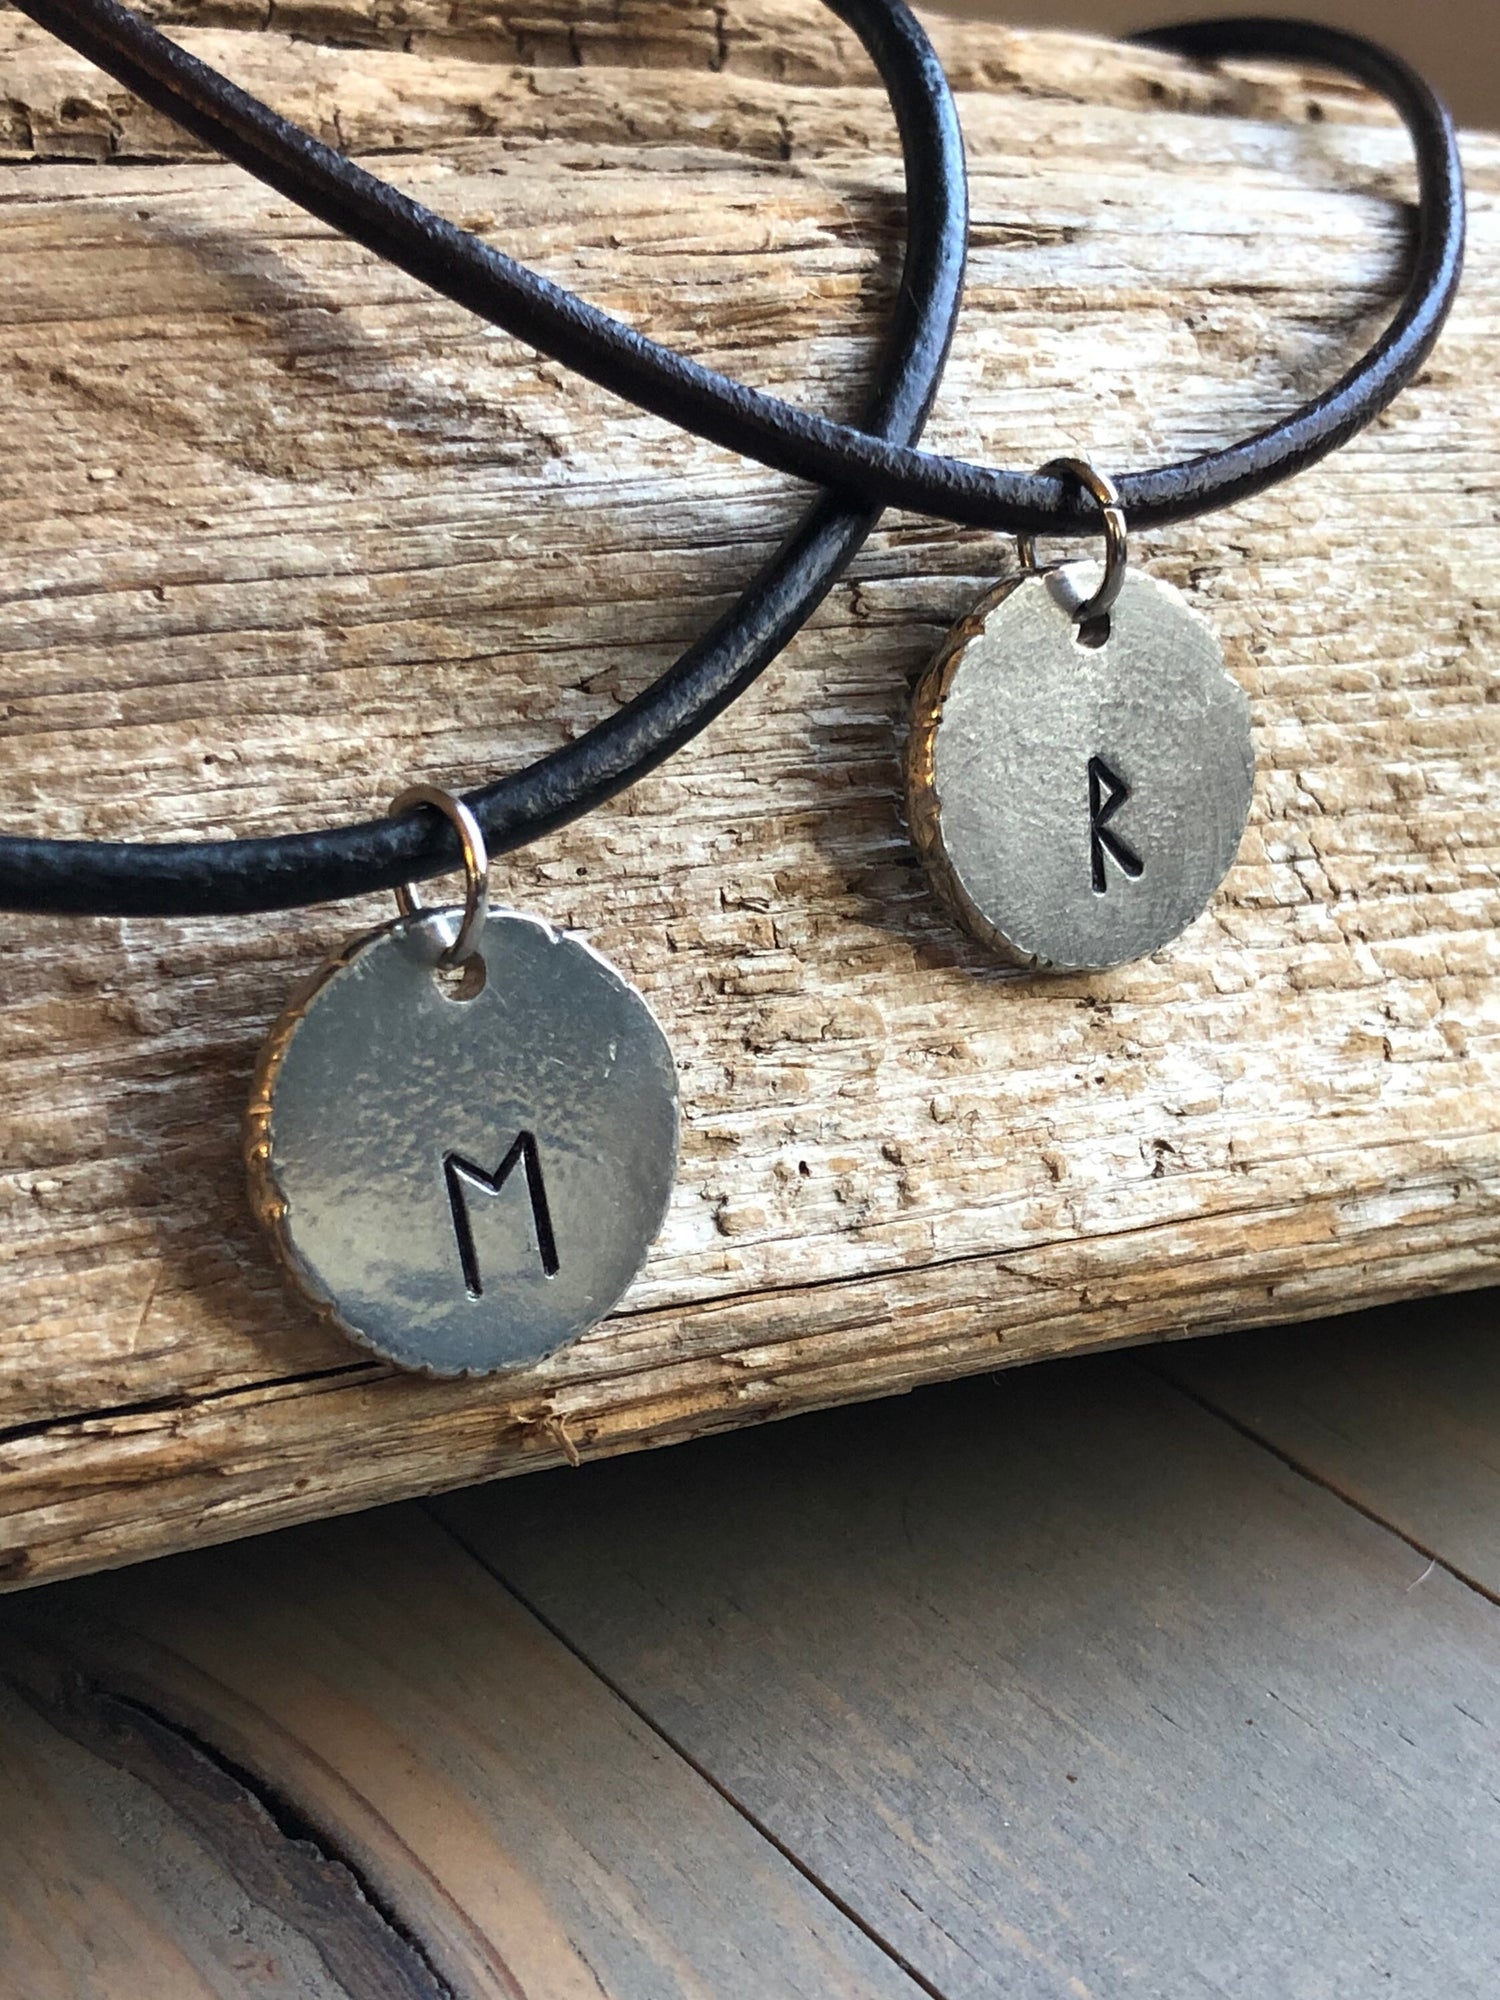 Pewter Rune Necklace - Viking Rune Pendant - Norse Pewter & Leather Necklace - Viking Elder Futhark Rune Choker - Hand Crafted and Stamped